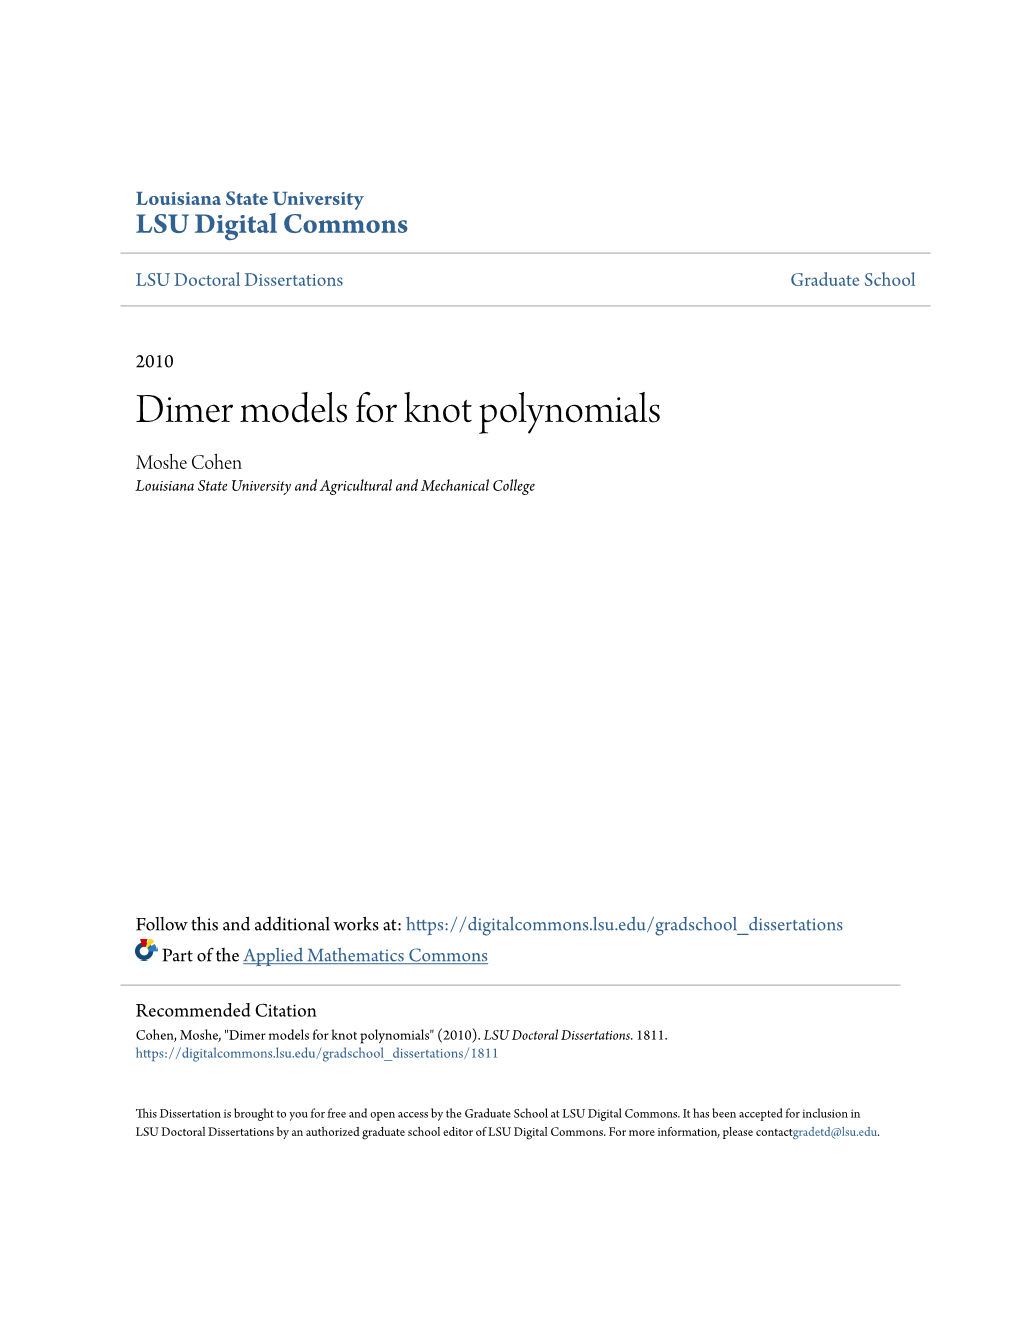 Dimer Models for Knot Polynomials Moshe Cohen Louisiana State University and Agricultural and Mechanical College